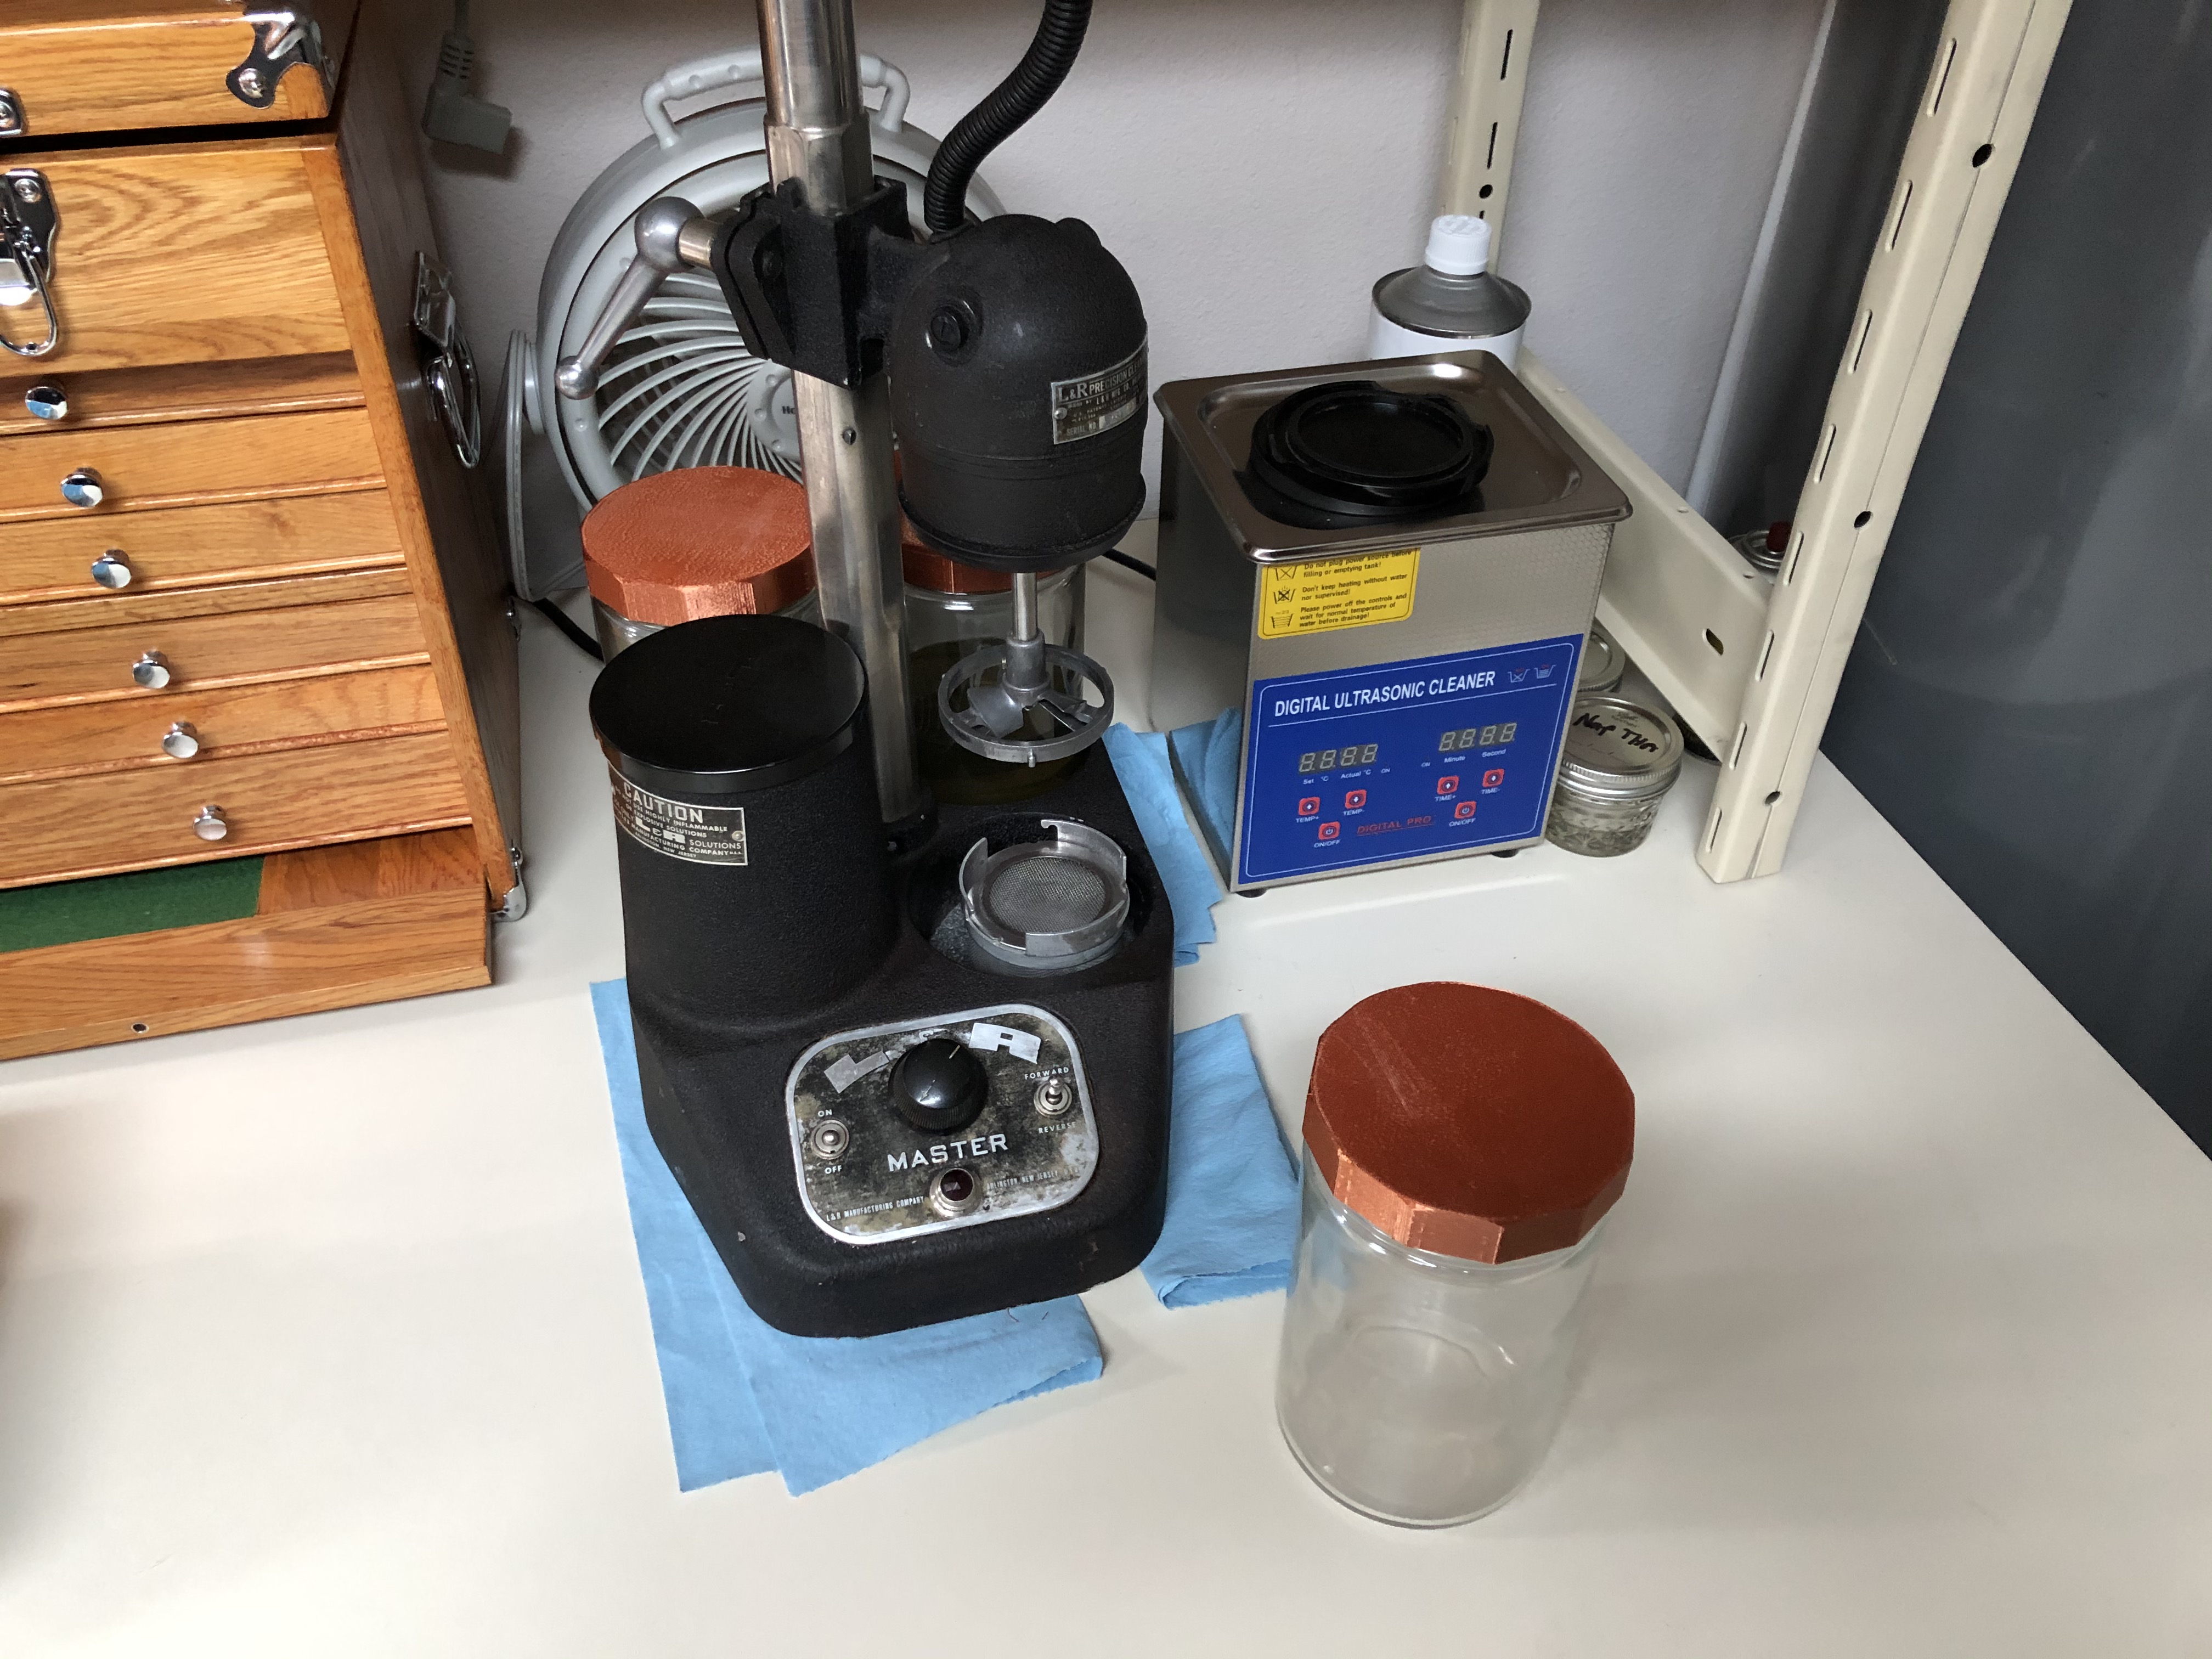 Ultrasonic Watch Cleaning Setup – 3 Jar Method with L&R Cleaner